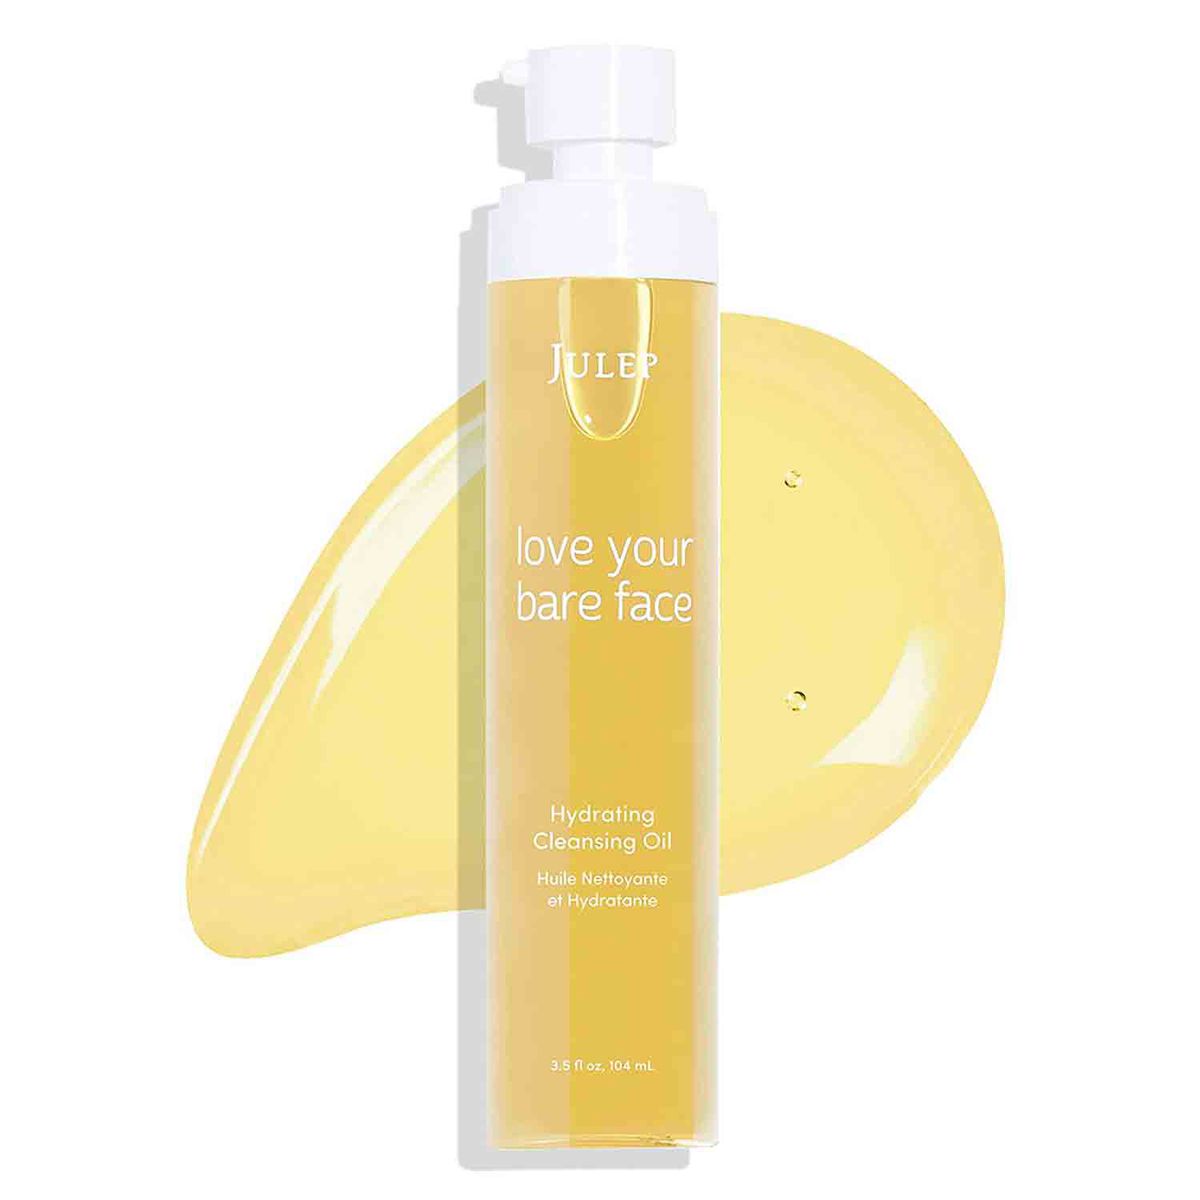 Julep Love Your Bare Face Age-Defying Cleansing Oil and Makeup Remover